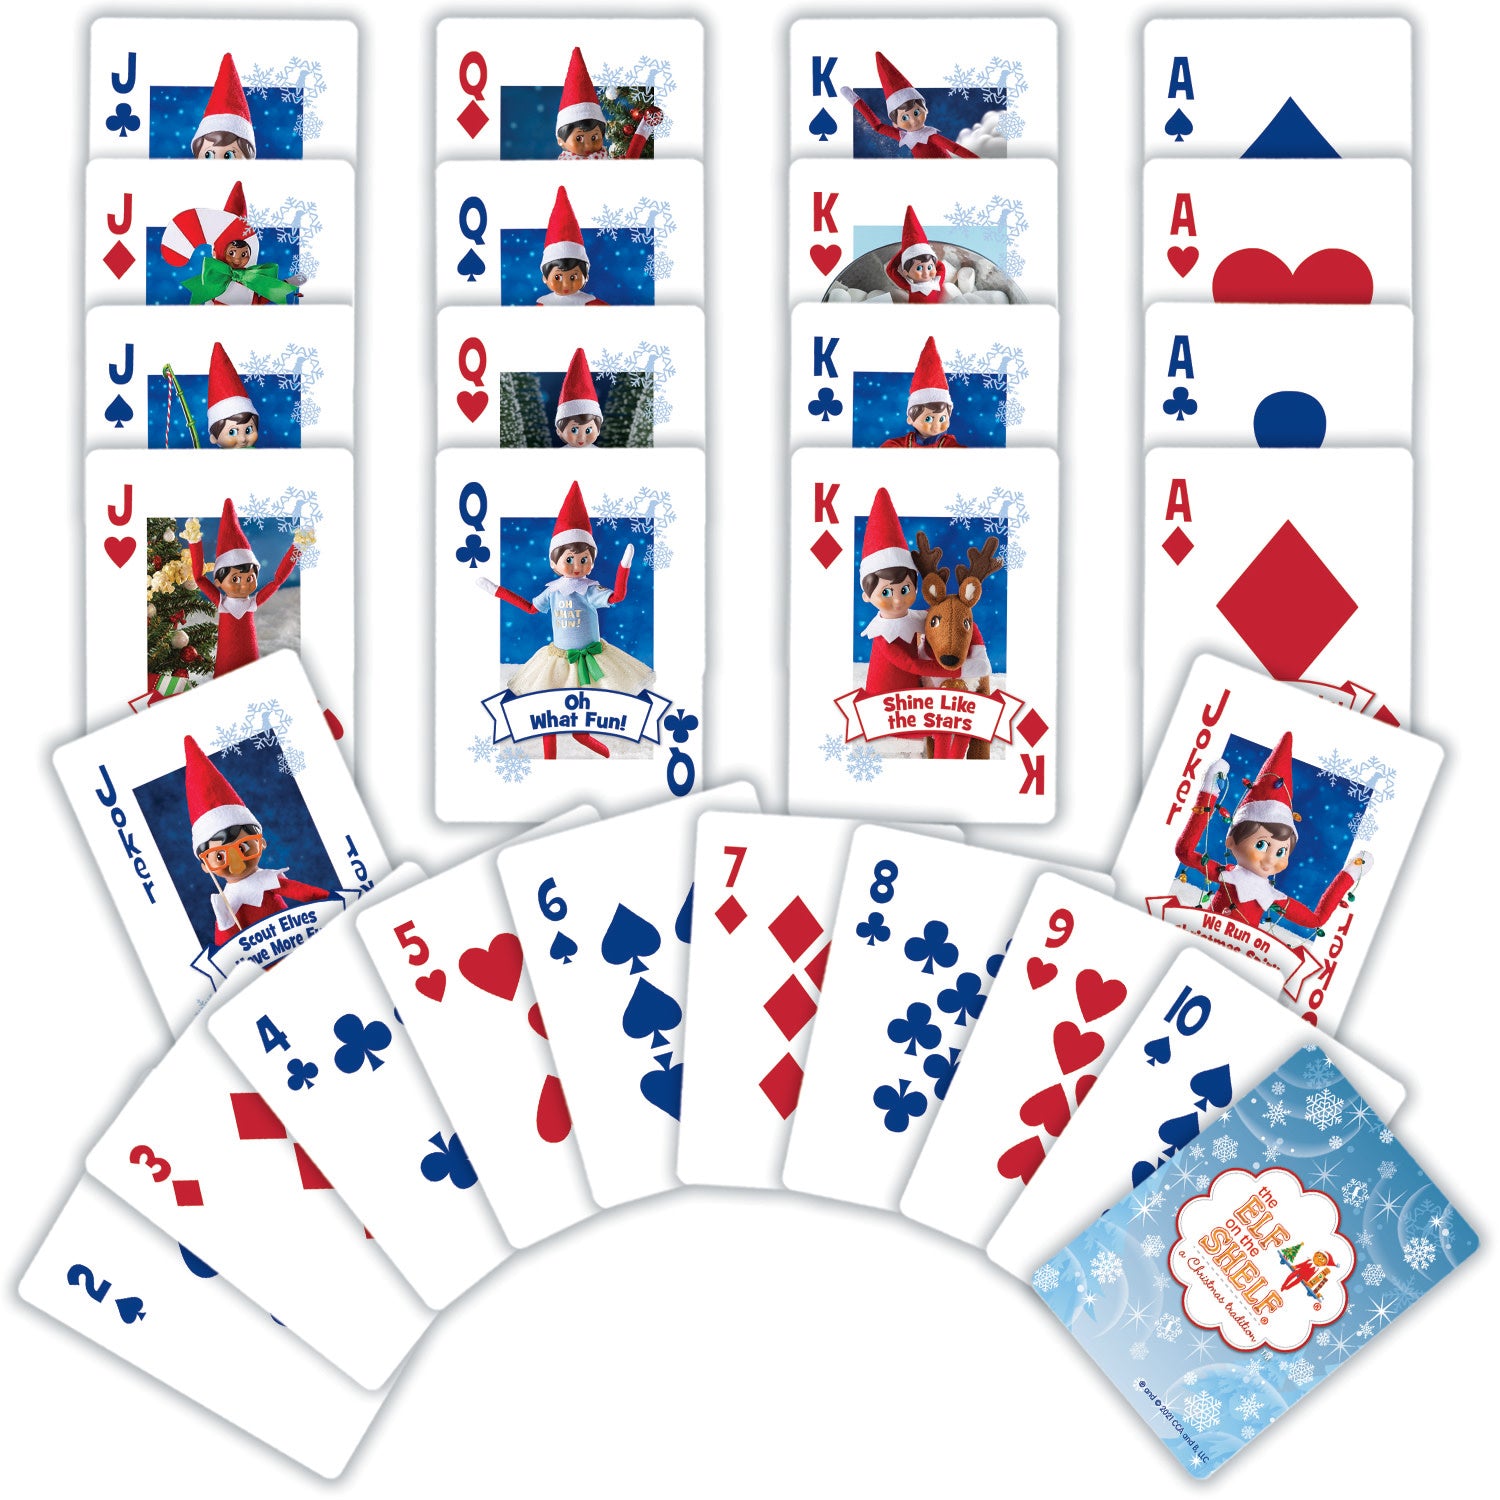 Elf on the Shelf - Supersized Playing Cards